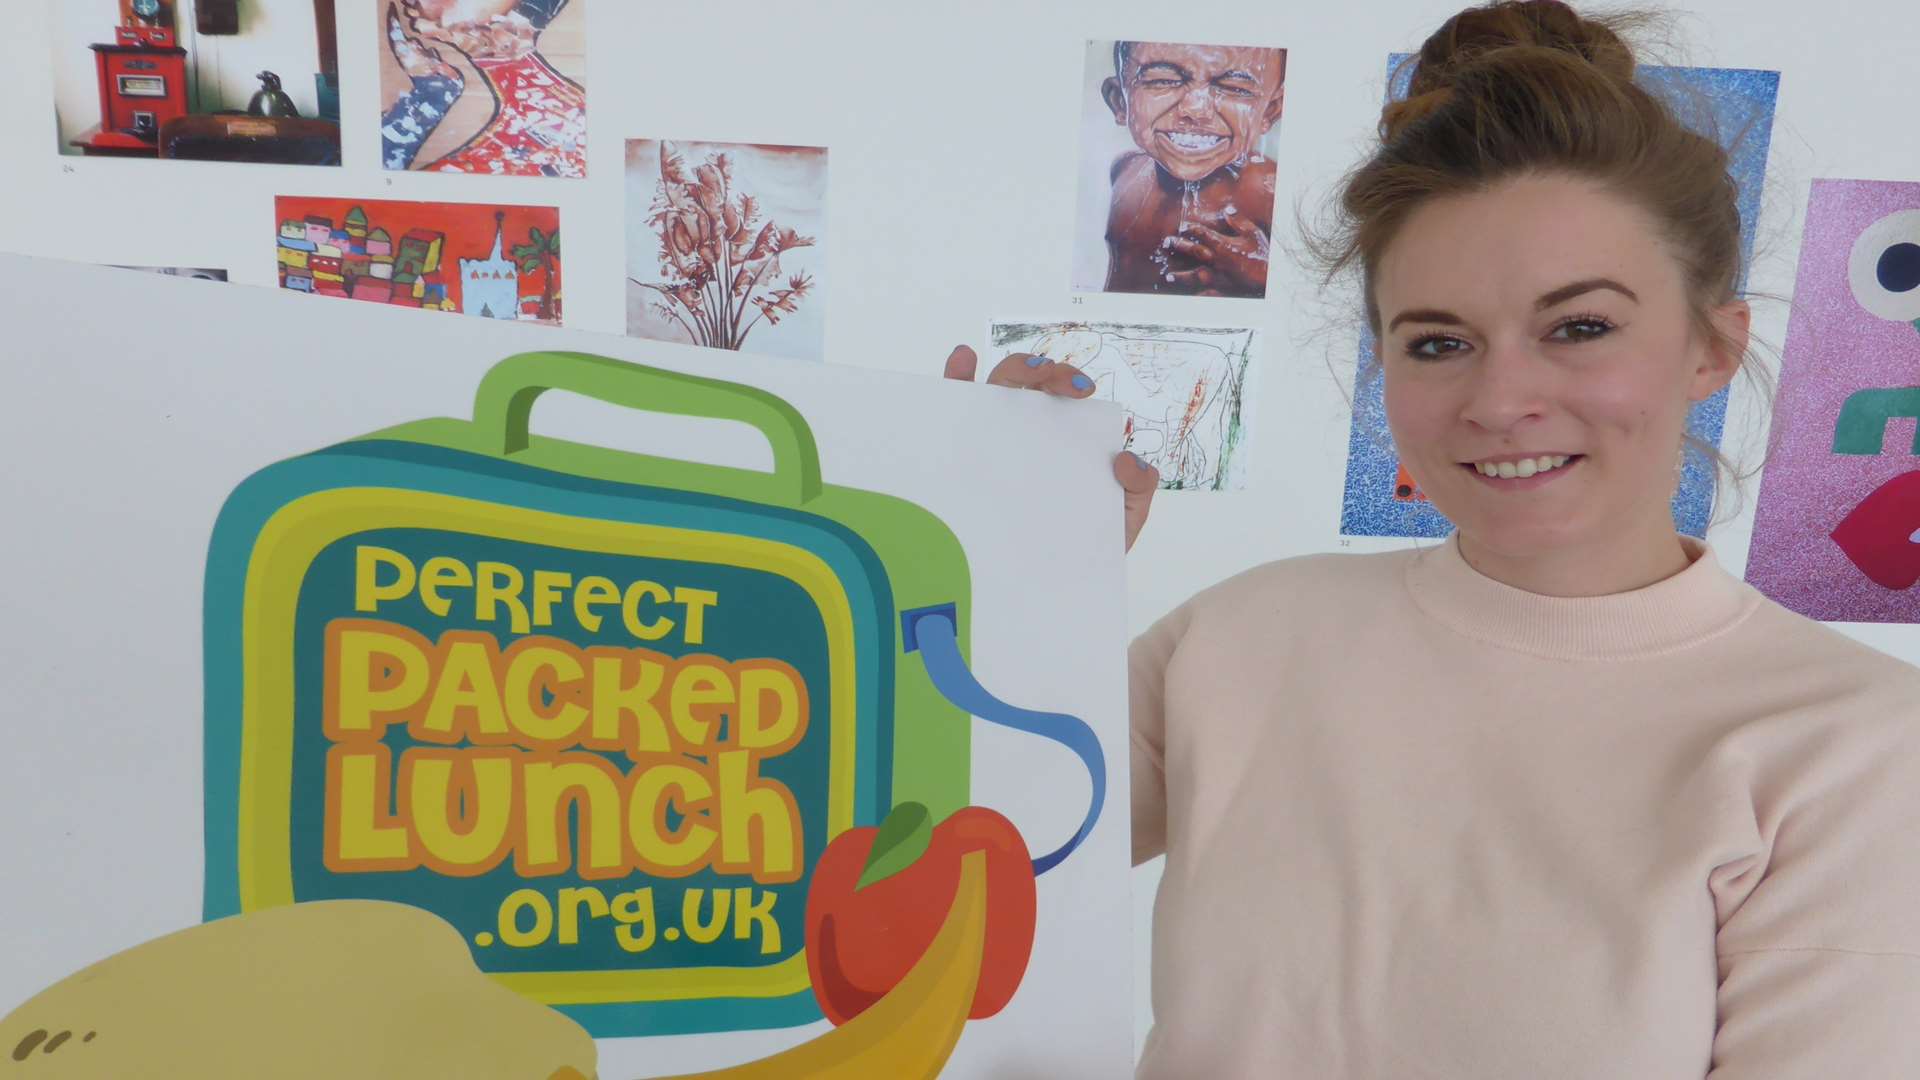 Molly Molloy of Turner Contemporary, Margate shows her support for the Perfect Packed Lunch Awards which encourages creativity and imagination in primary school children.